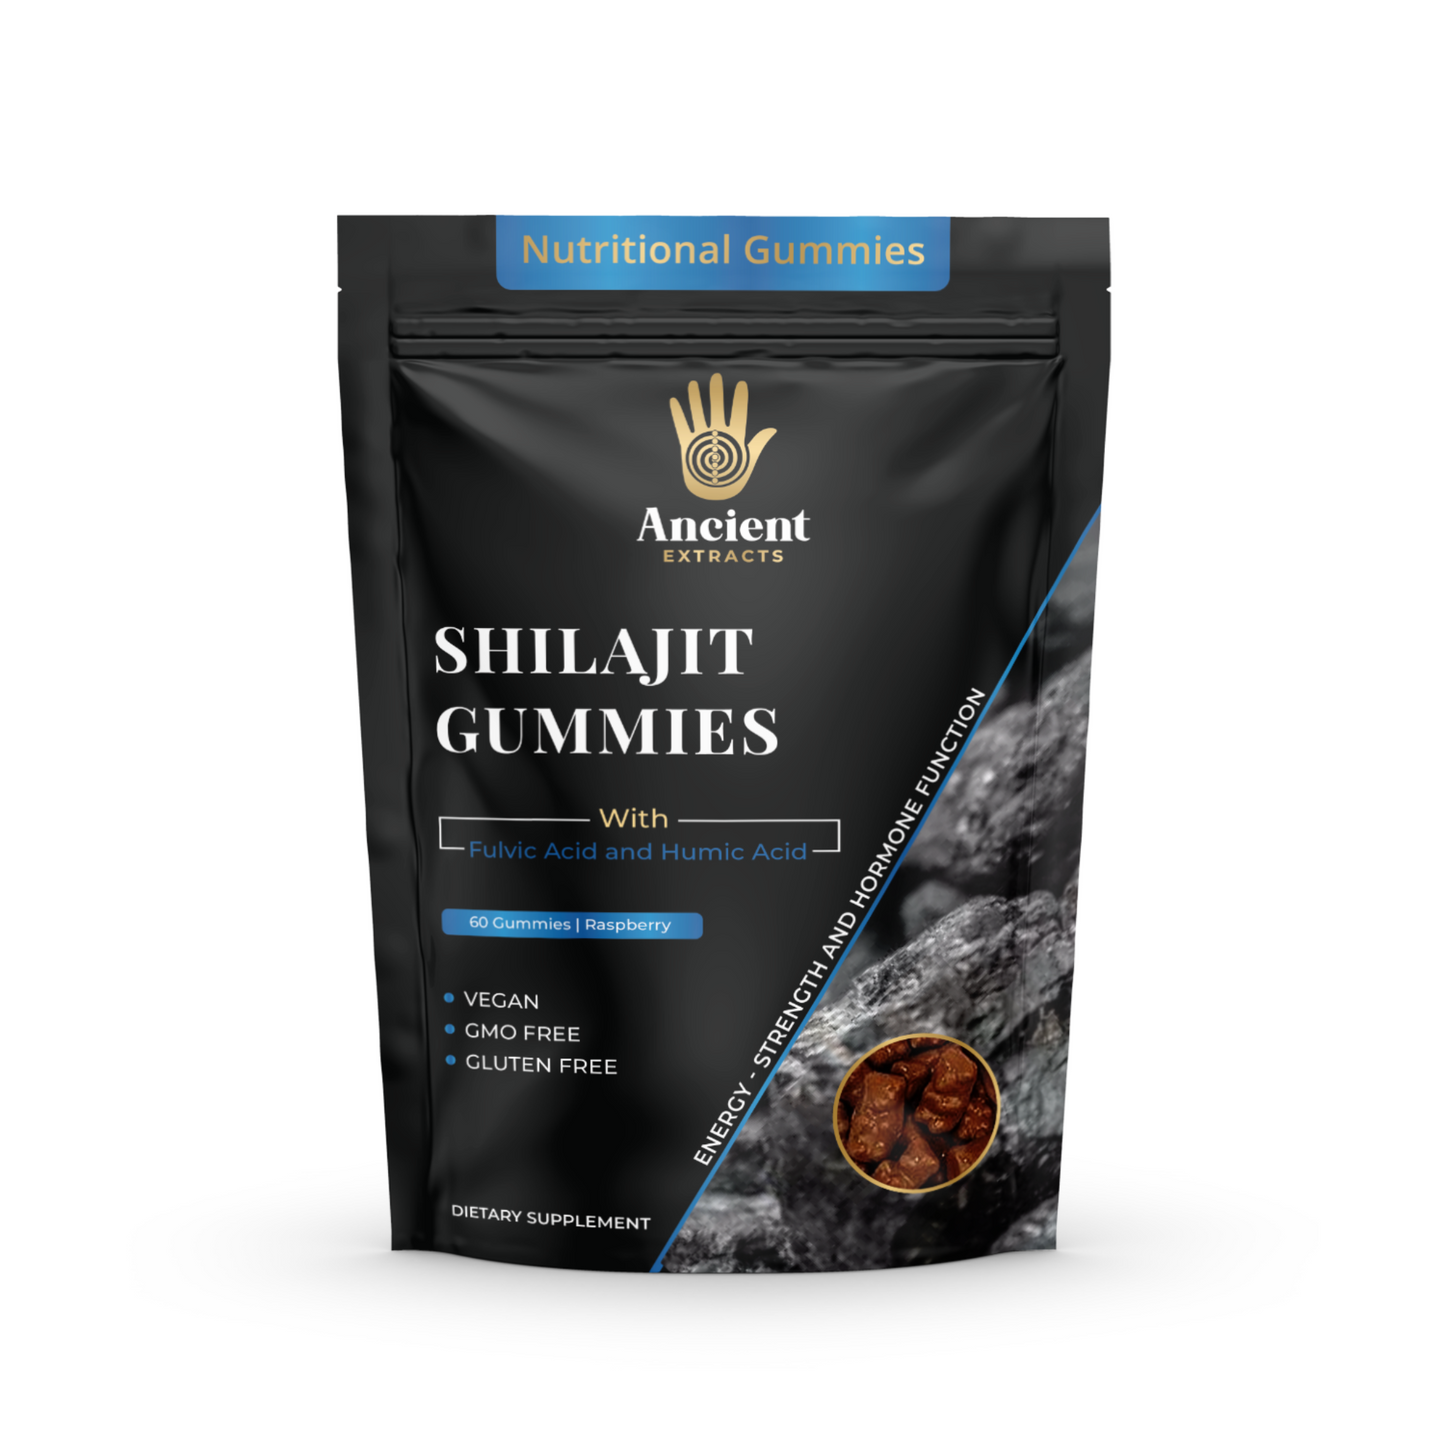 Ancient Extracts Shilajit Gummies Blueberry flavour 